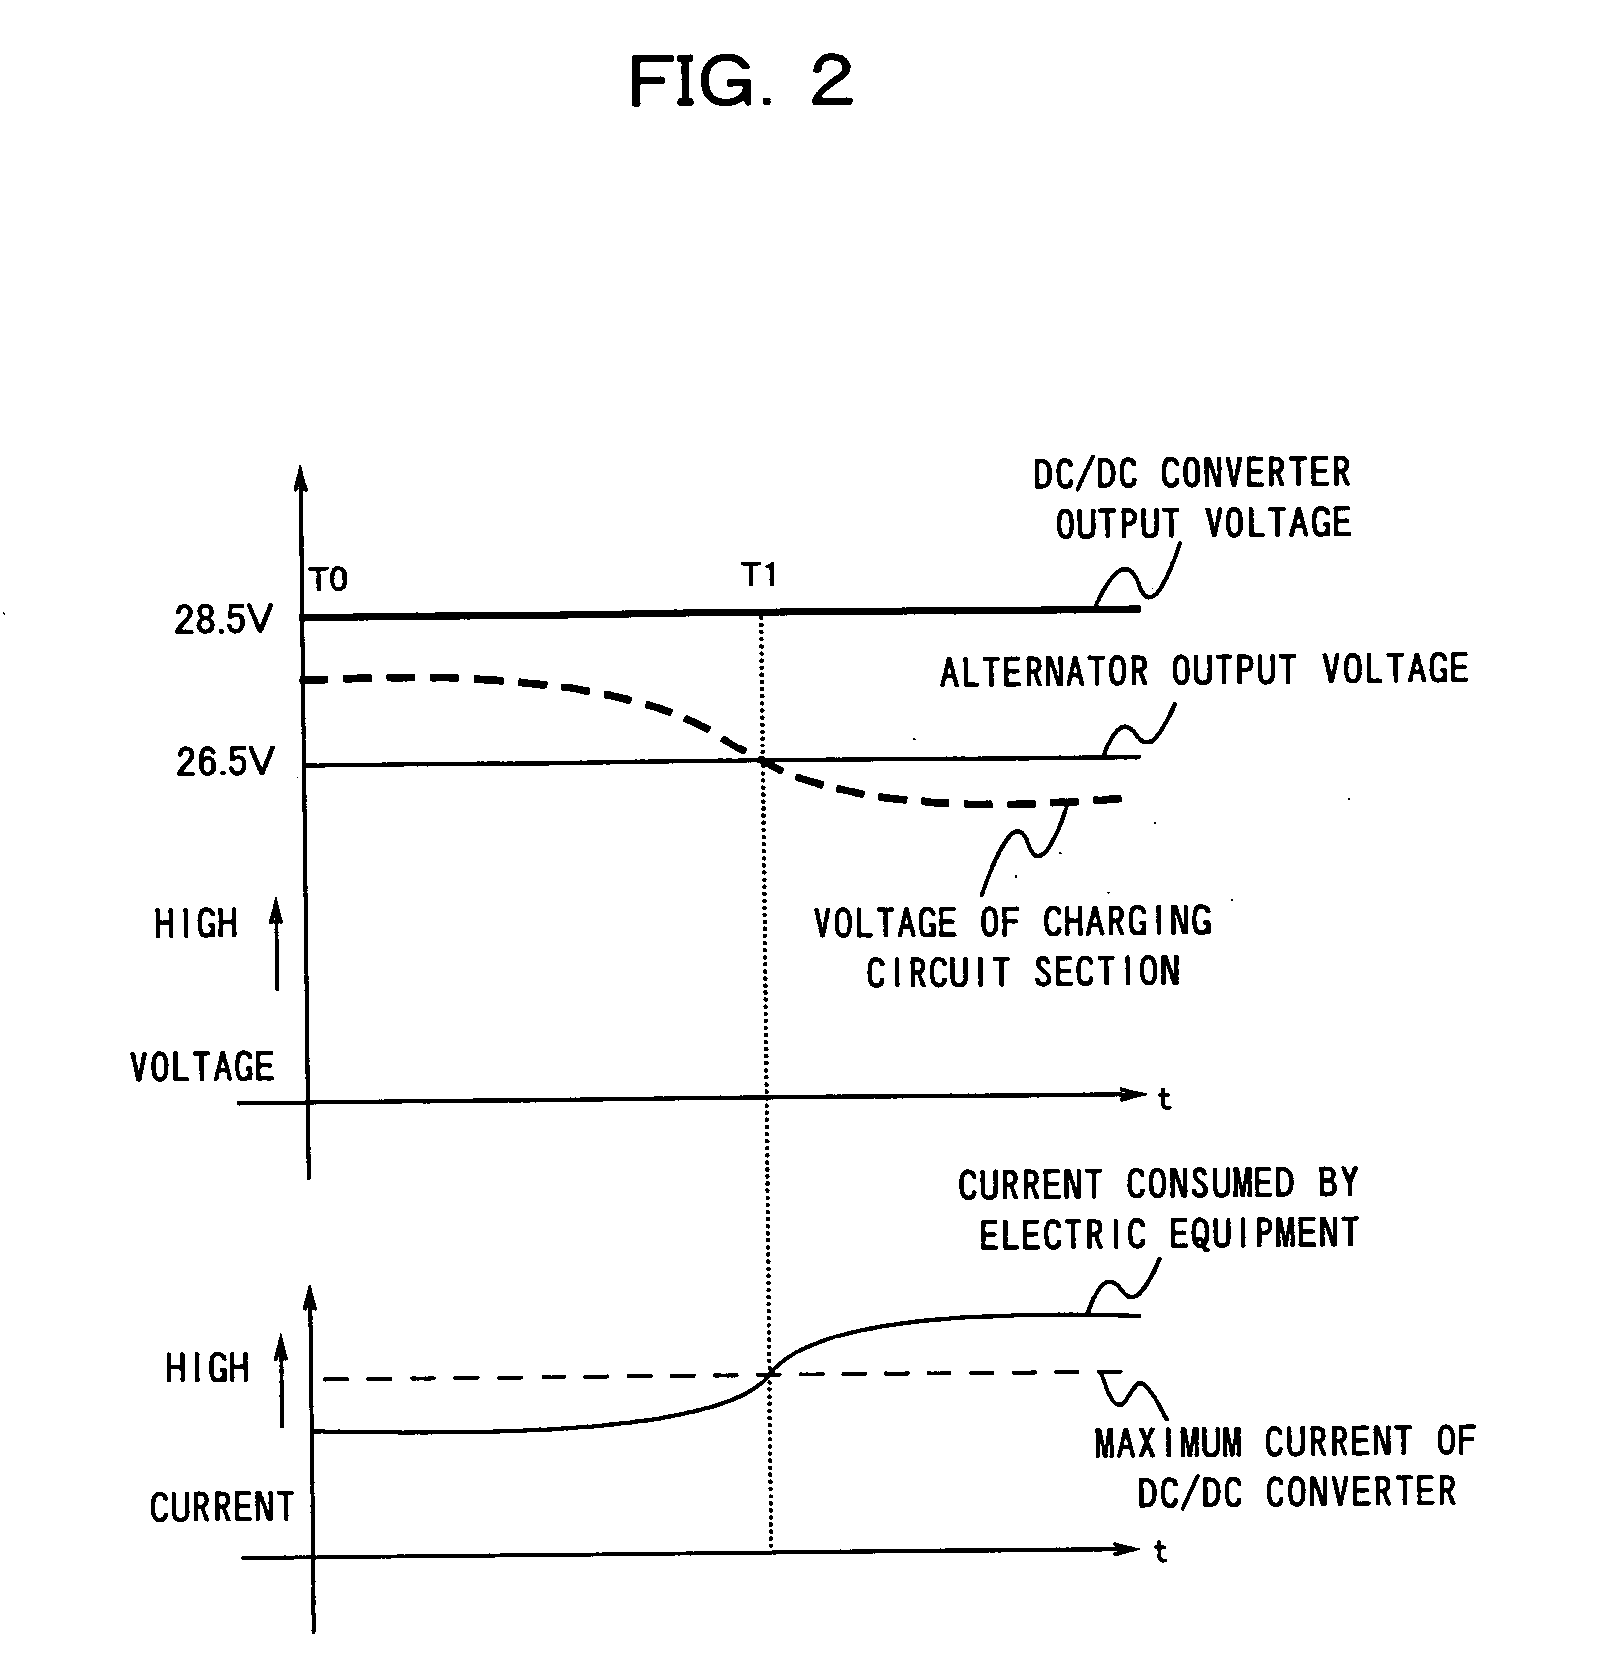 Battery charging system for hybrid electric vehicles